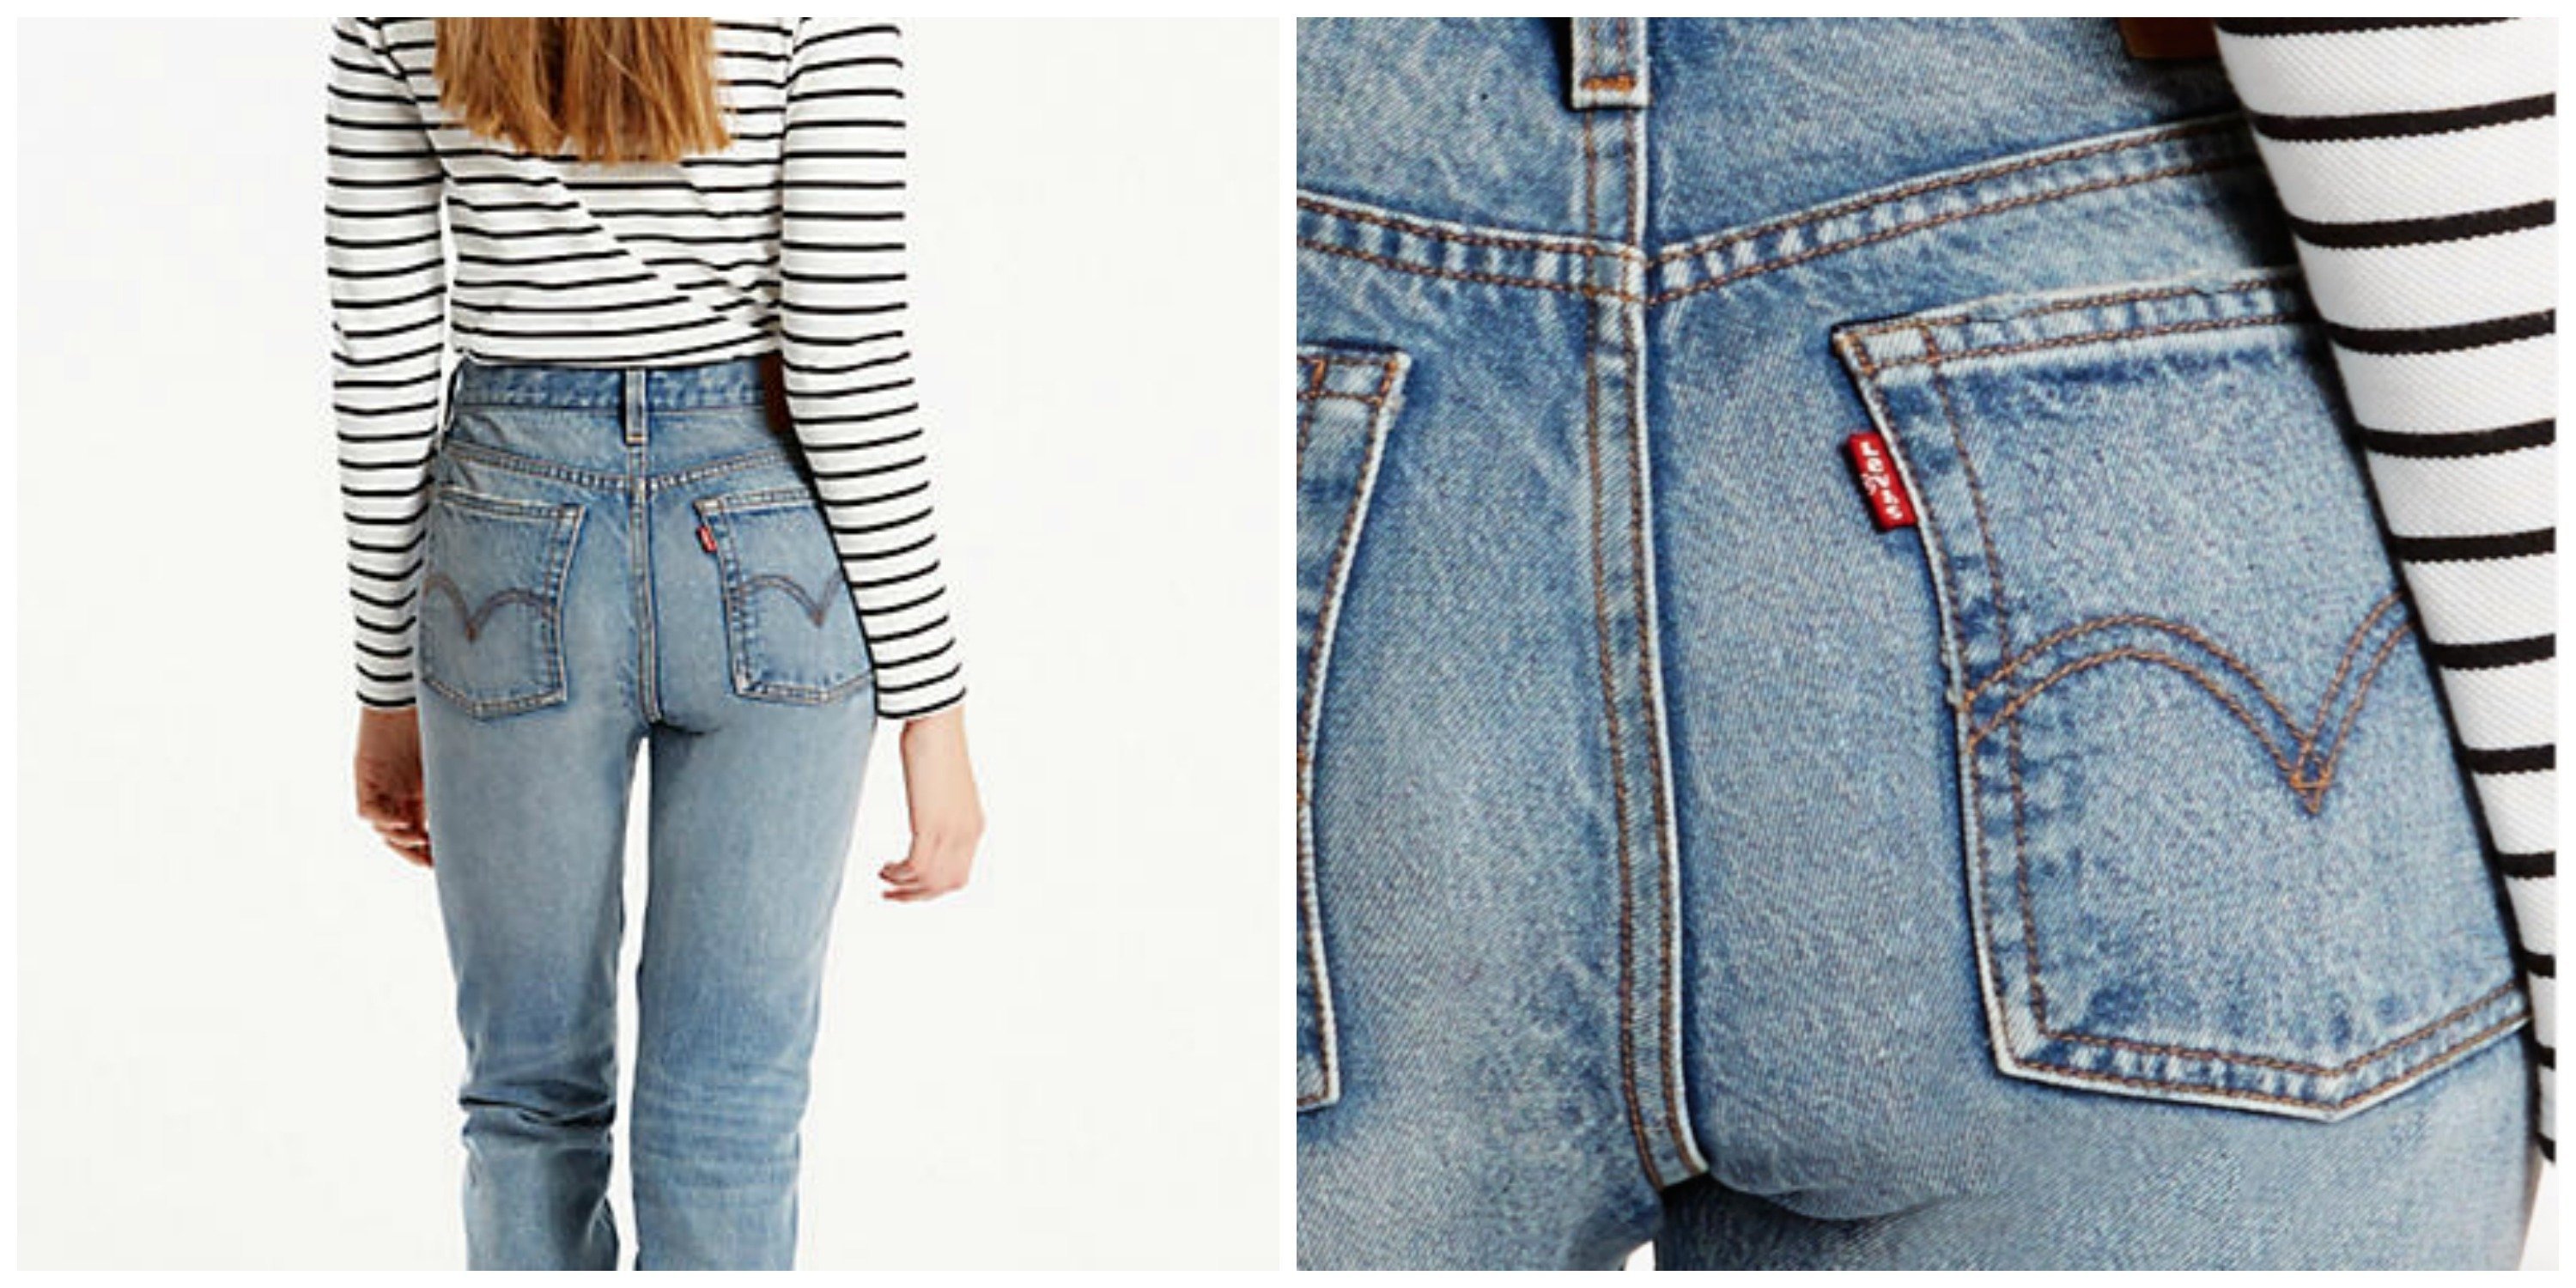 levis wedgie jeans canada